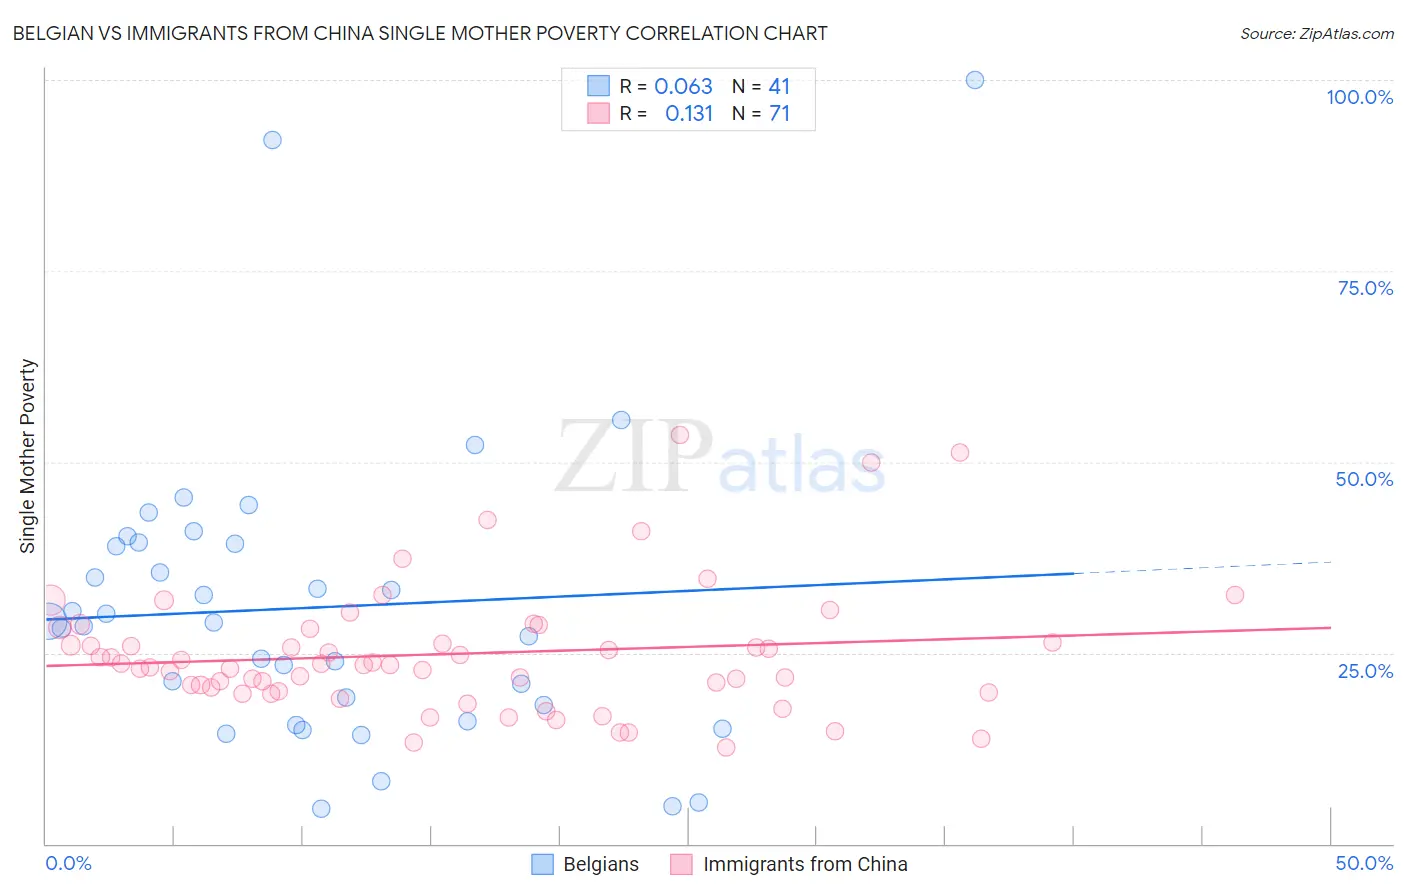 Belgian vs Immigrants from China Single Mother Poverty